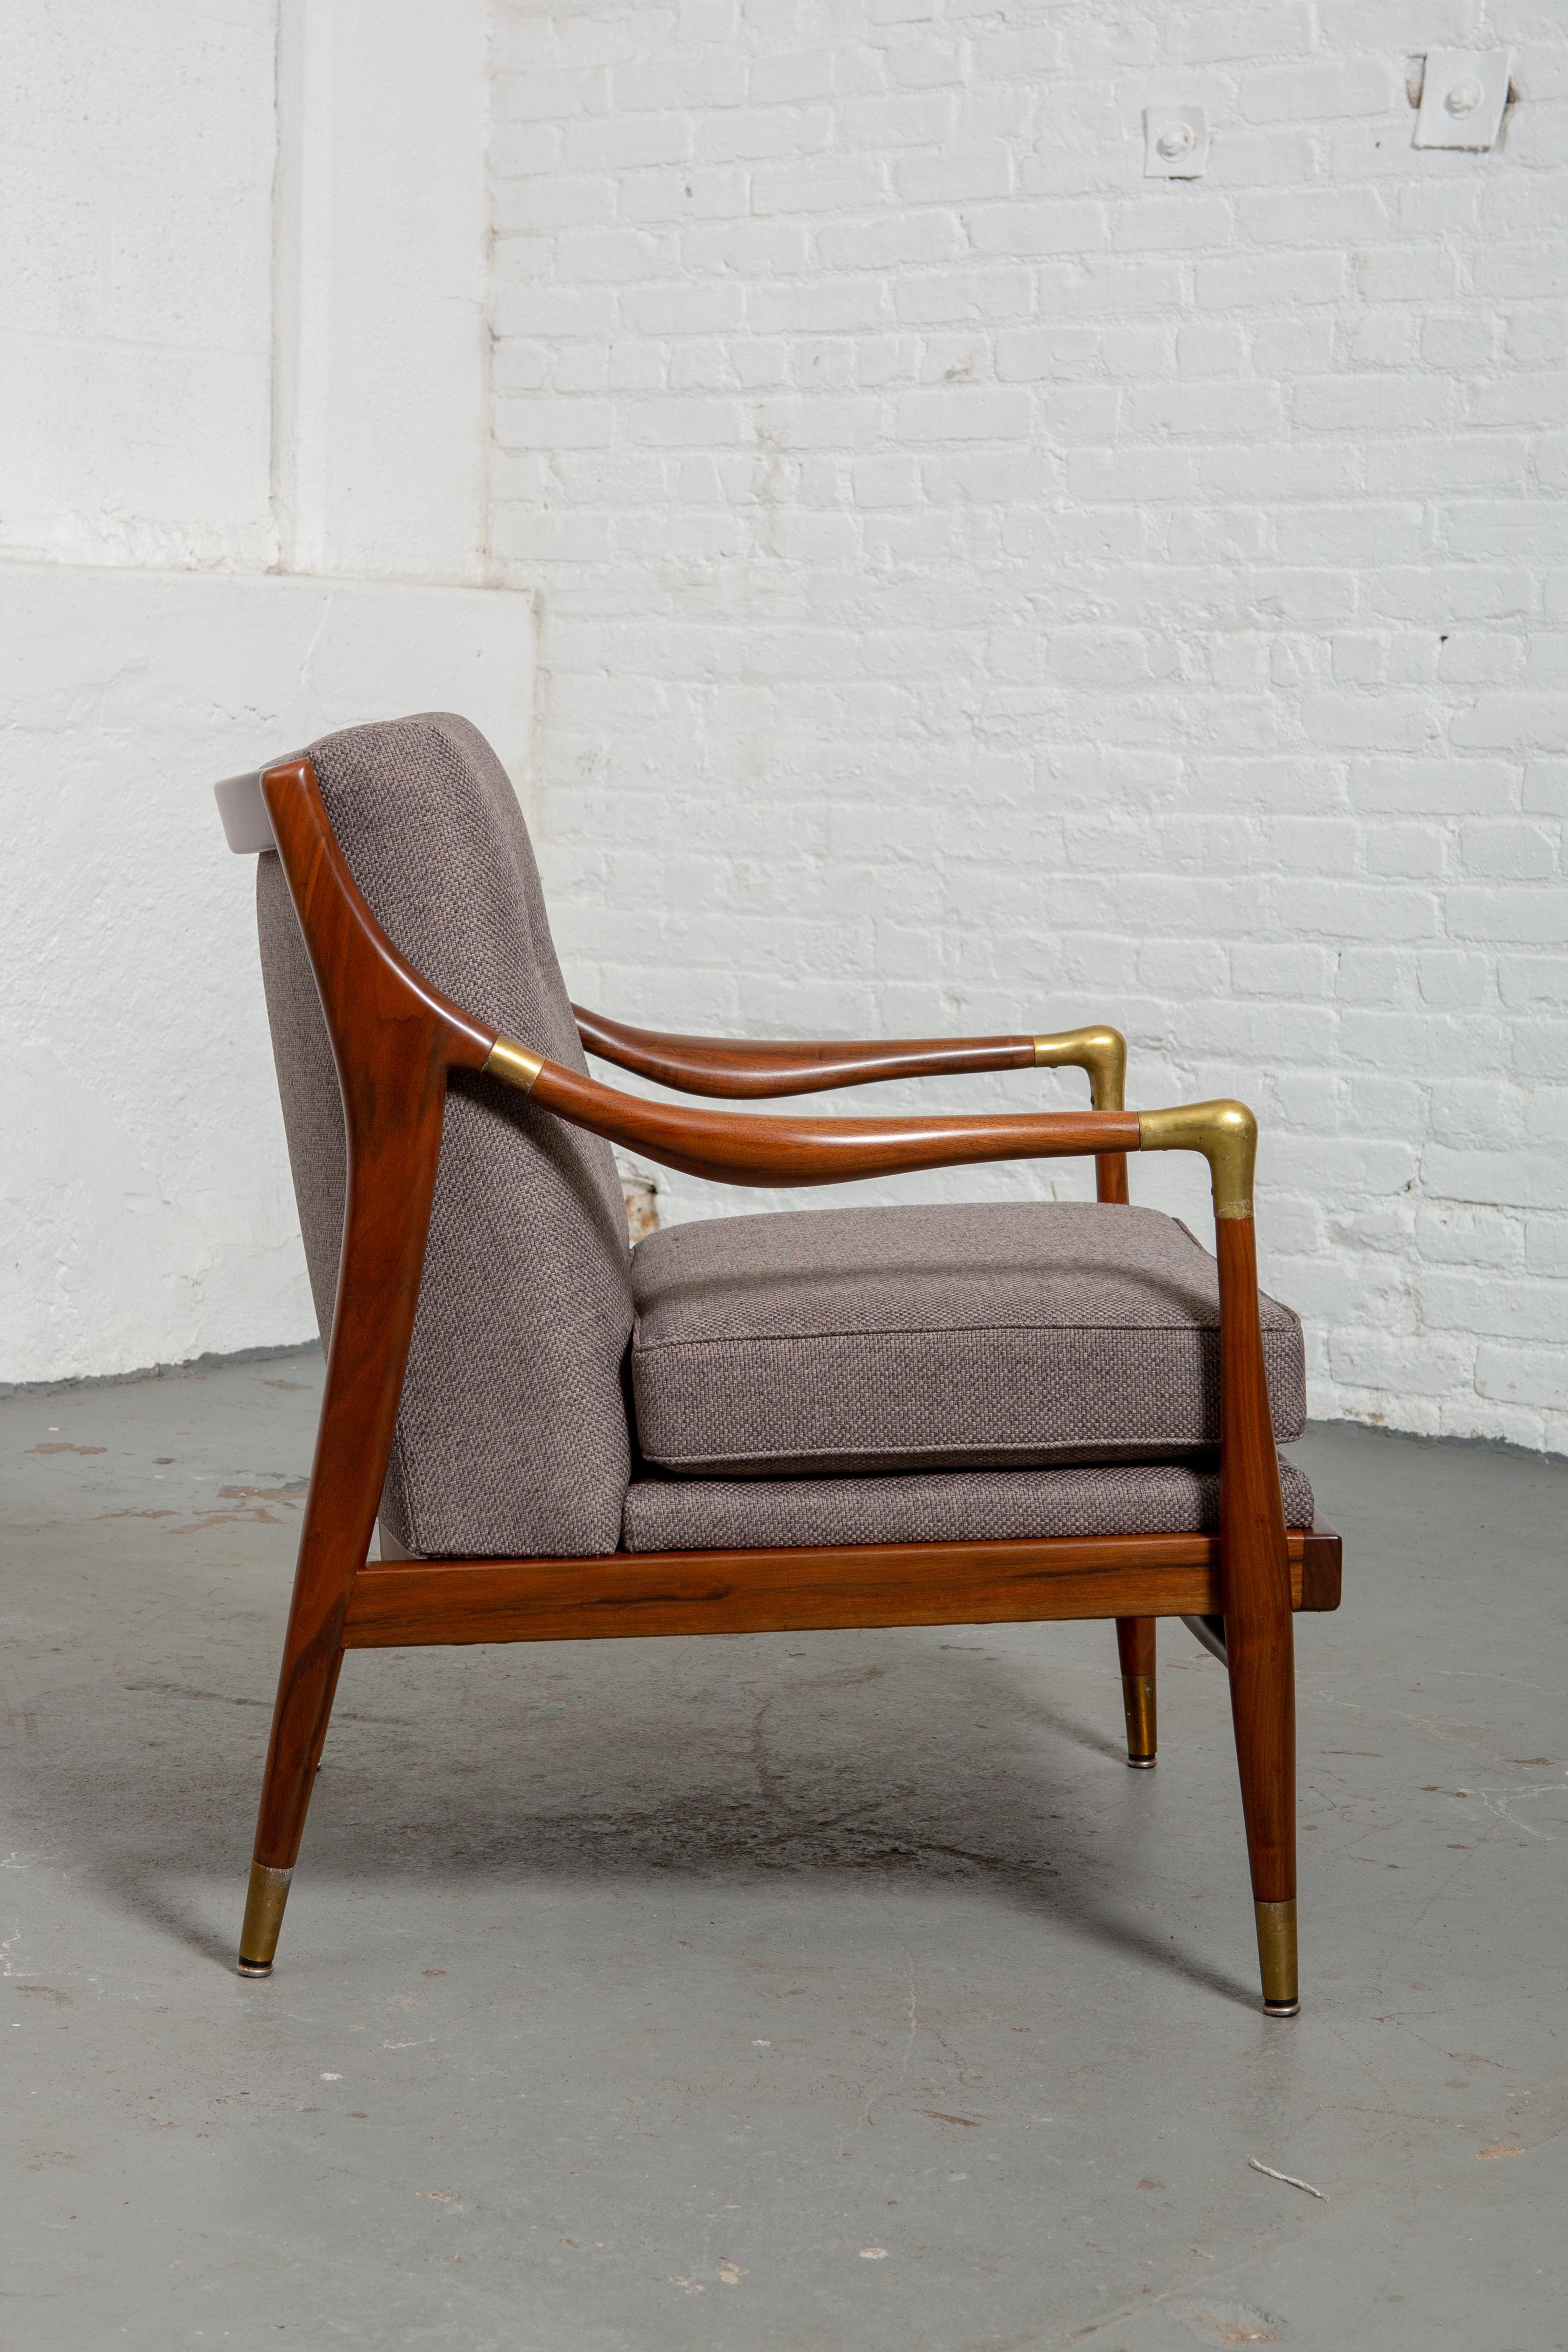 Mid-Century Modern Restored American Midcentury Armchair with Brass Accents